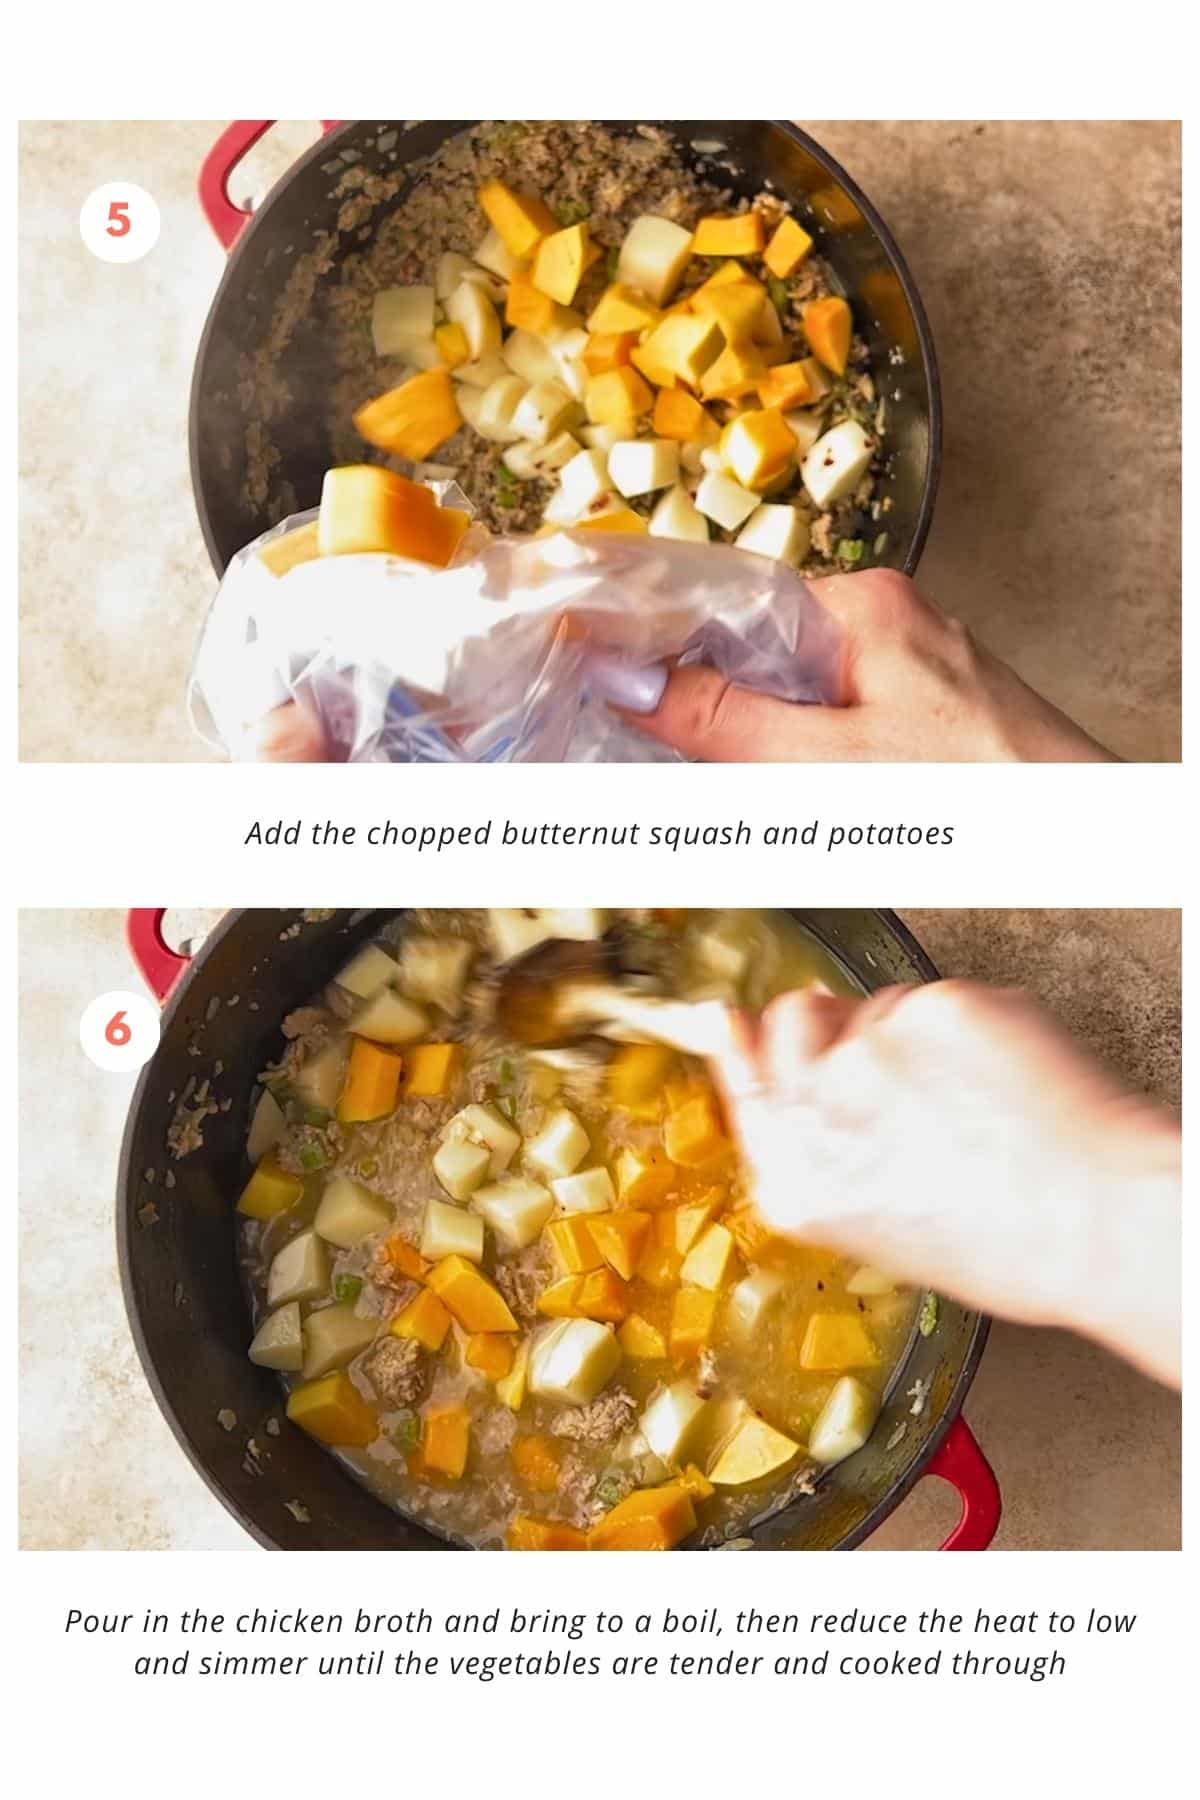 Chopped butternut squash and potatoes added to a pot with ground turkey and chicken broth. The pot is placed on a stove and is being cooked on low heat.